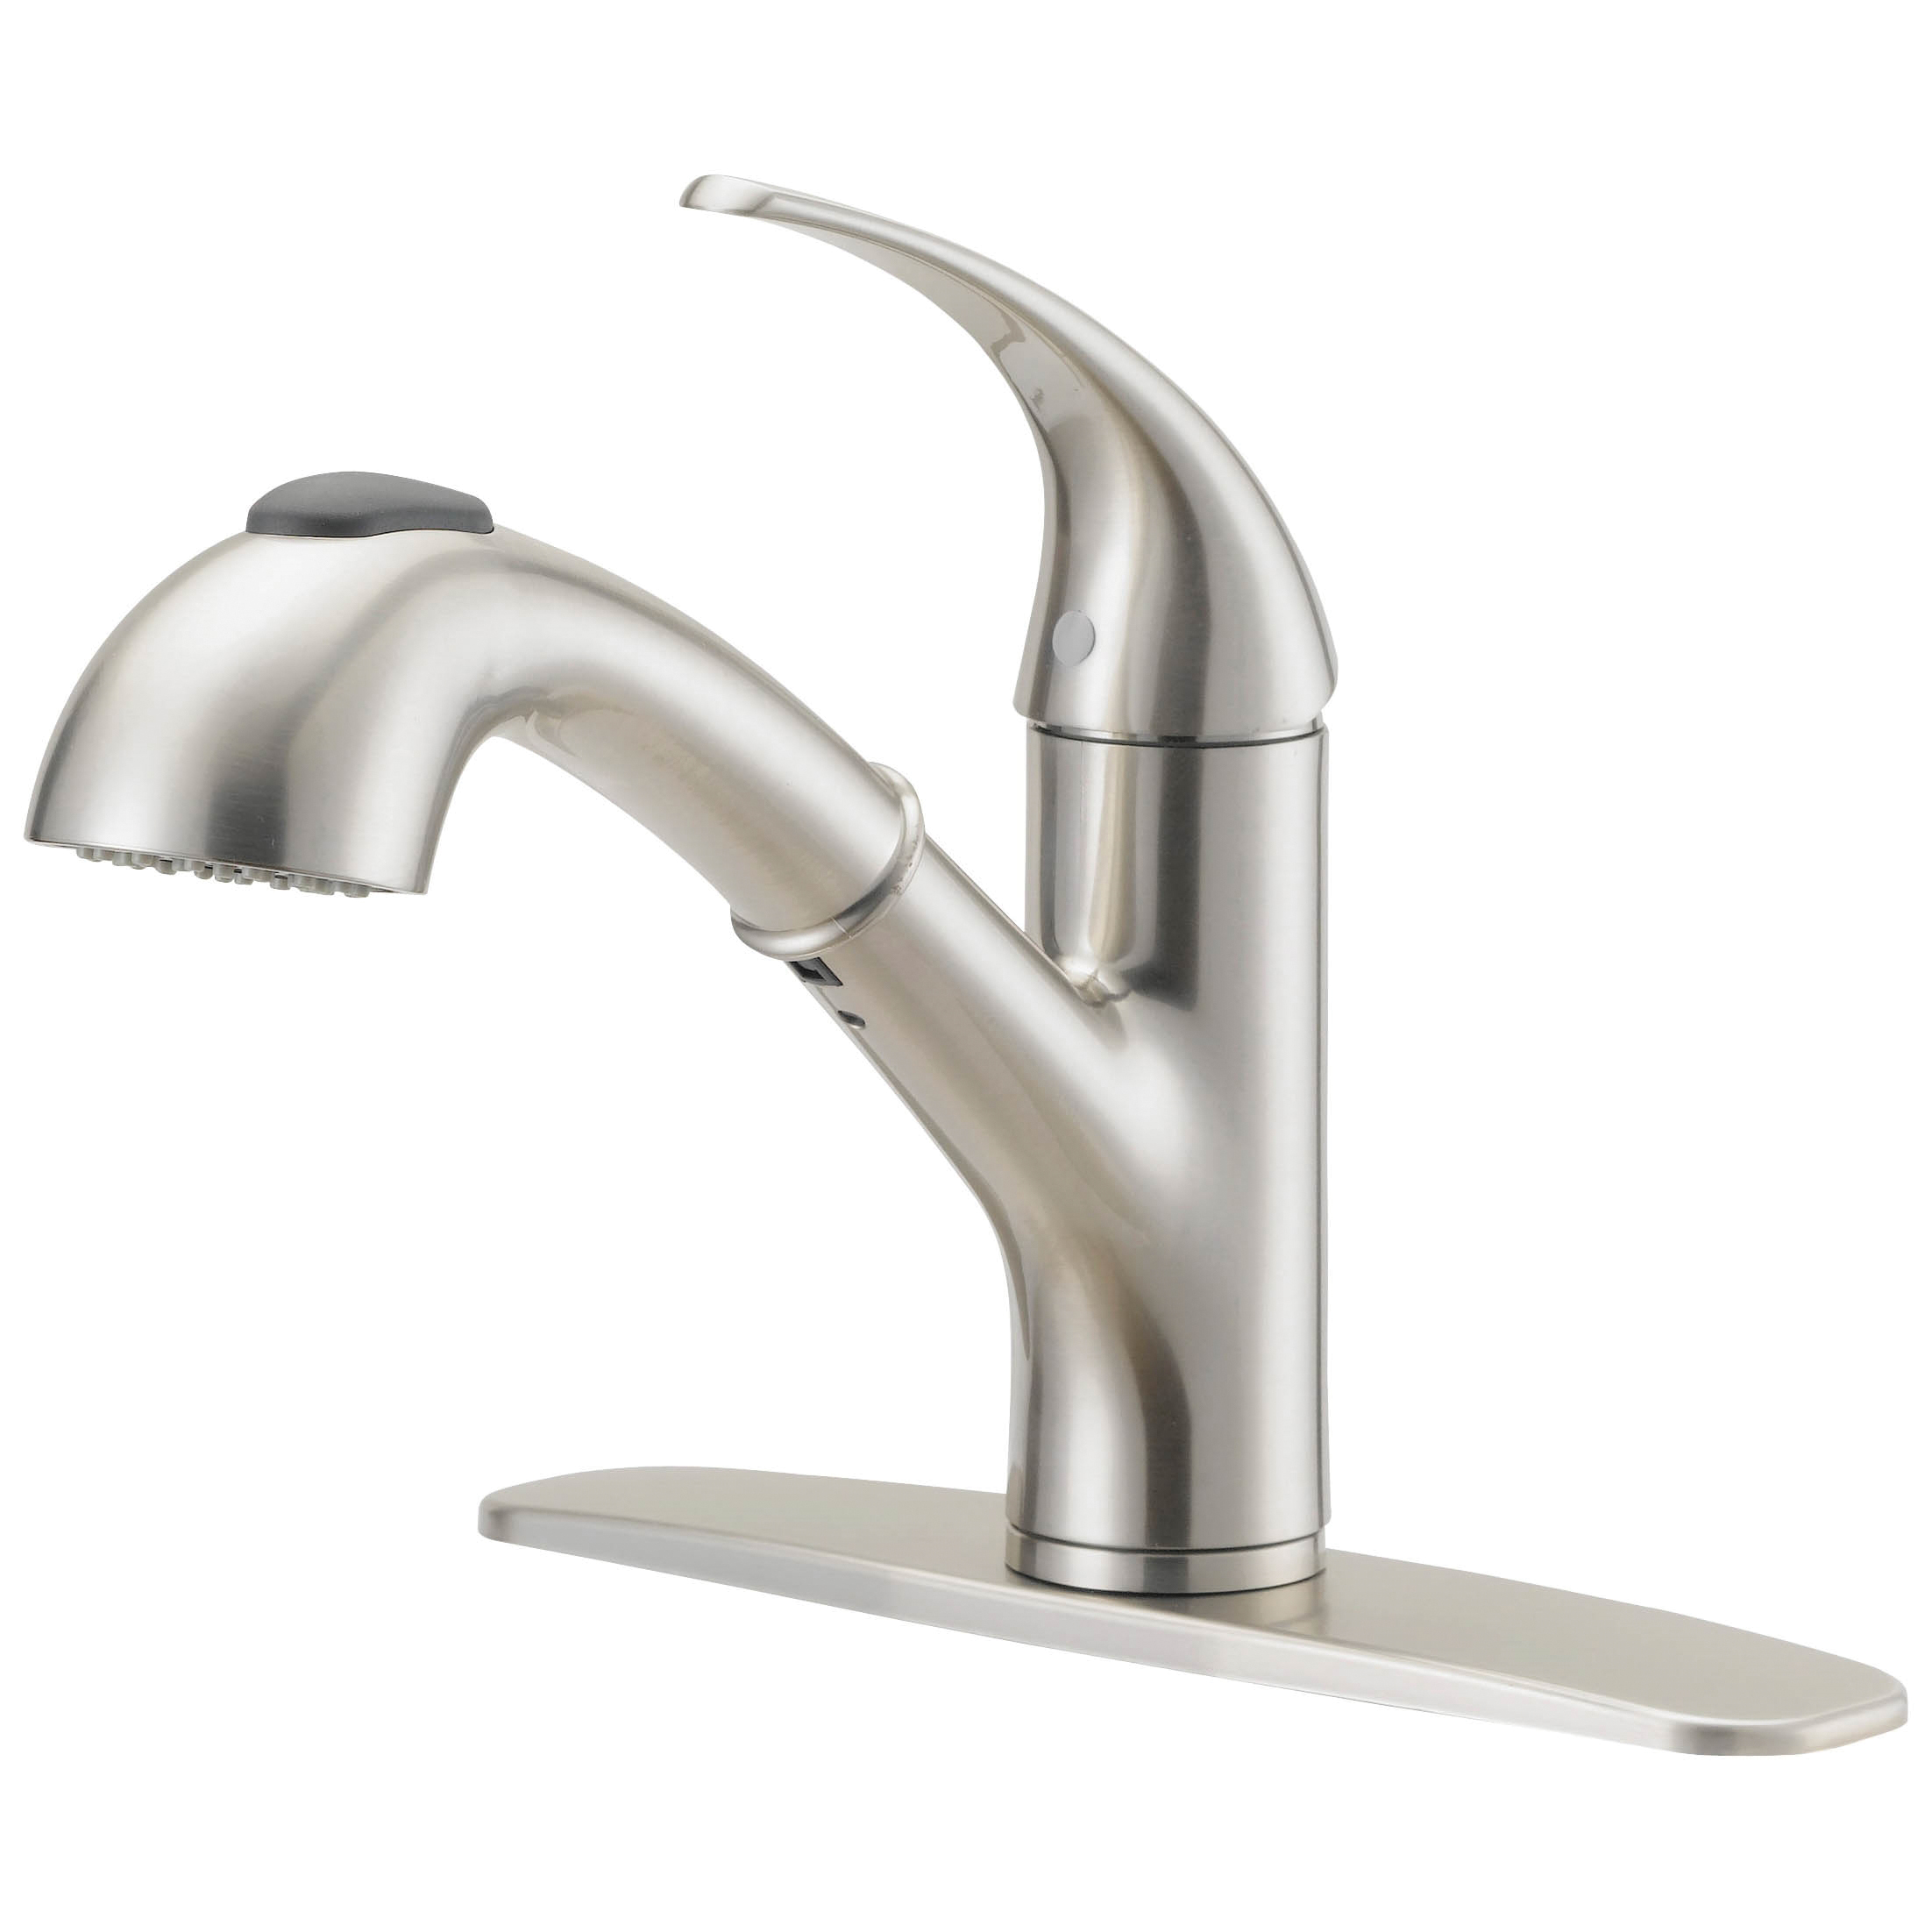 FP4A4079NP Kitchen Faucet, 1.8 gpm, 1-Faucet Handle, 1, 3-Faucet Hole, Metal/Plastic, Stainless Steel